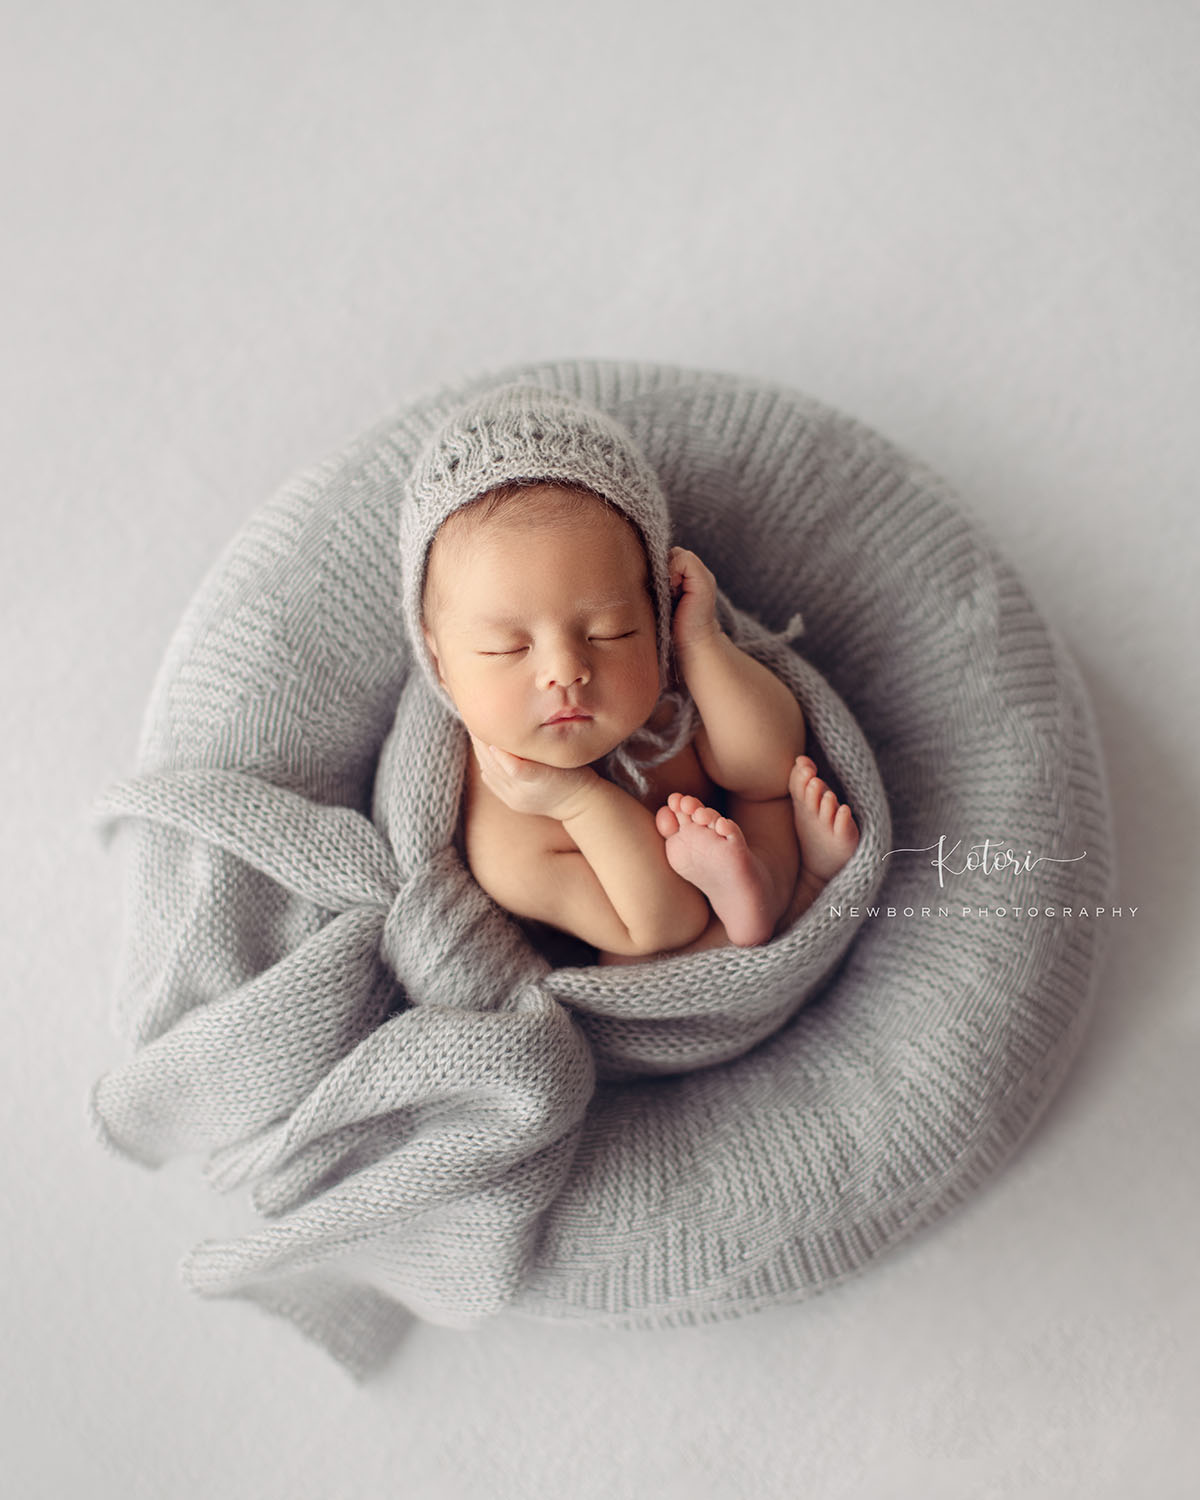 How to Choose the Best Backdrops for your Newborn Photography Sessions –  Sweet Baby Photo Props